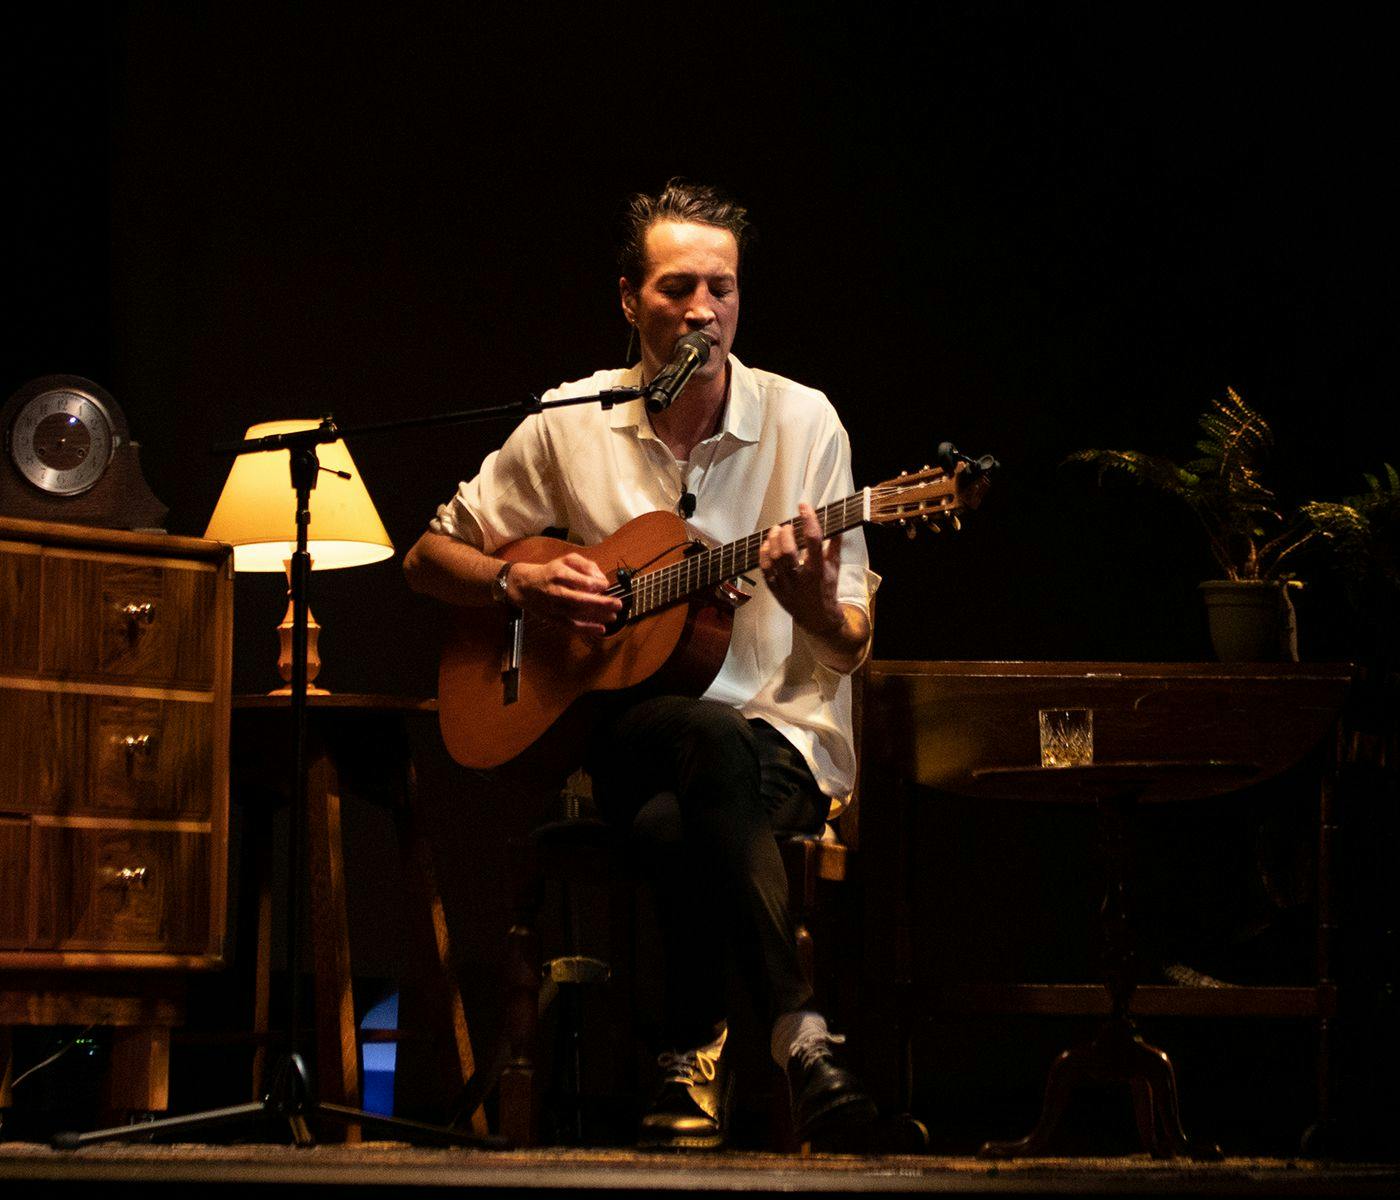 Marlon Williams seated, playing the guitar.